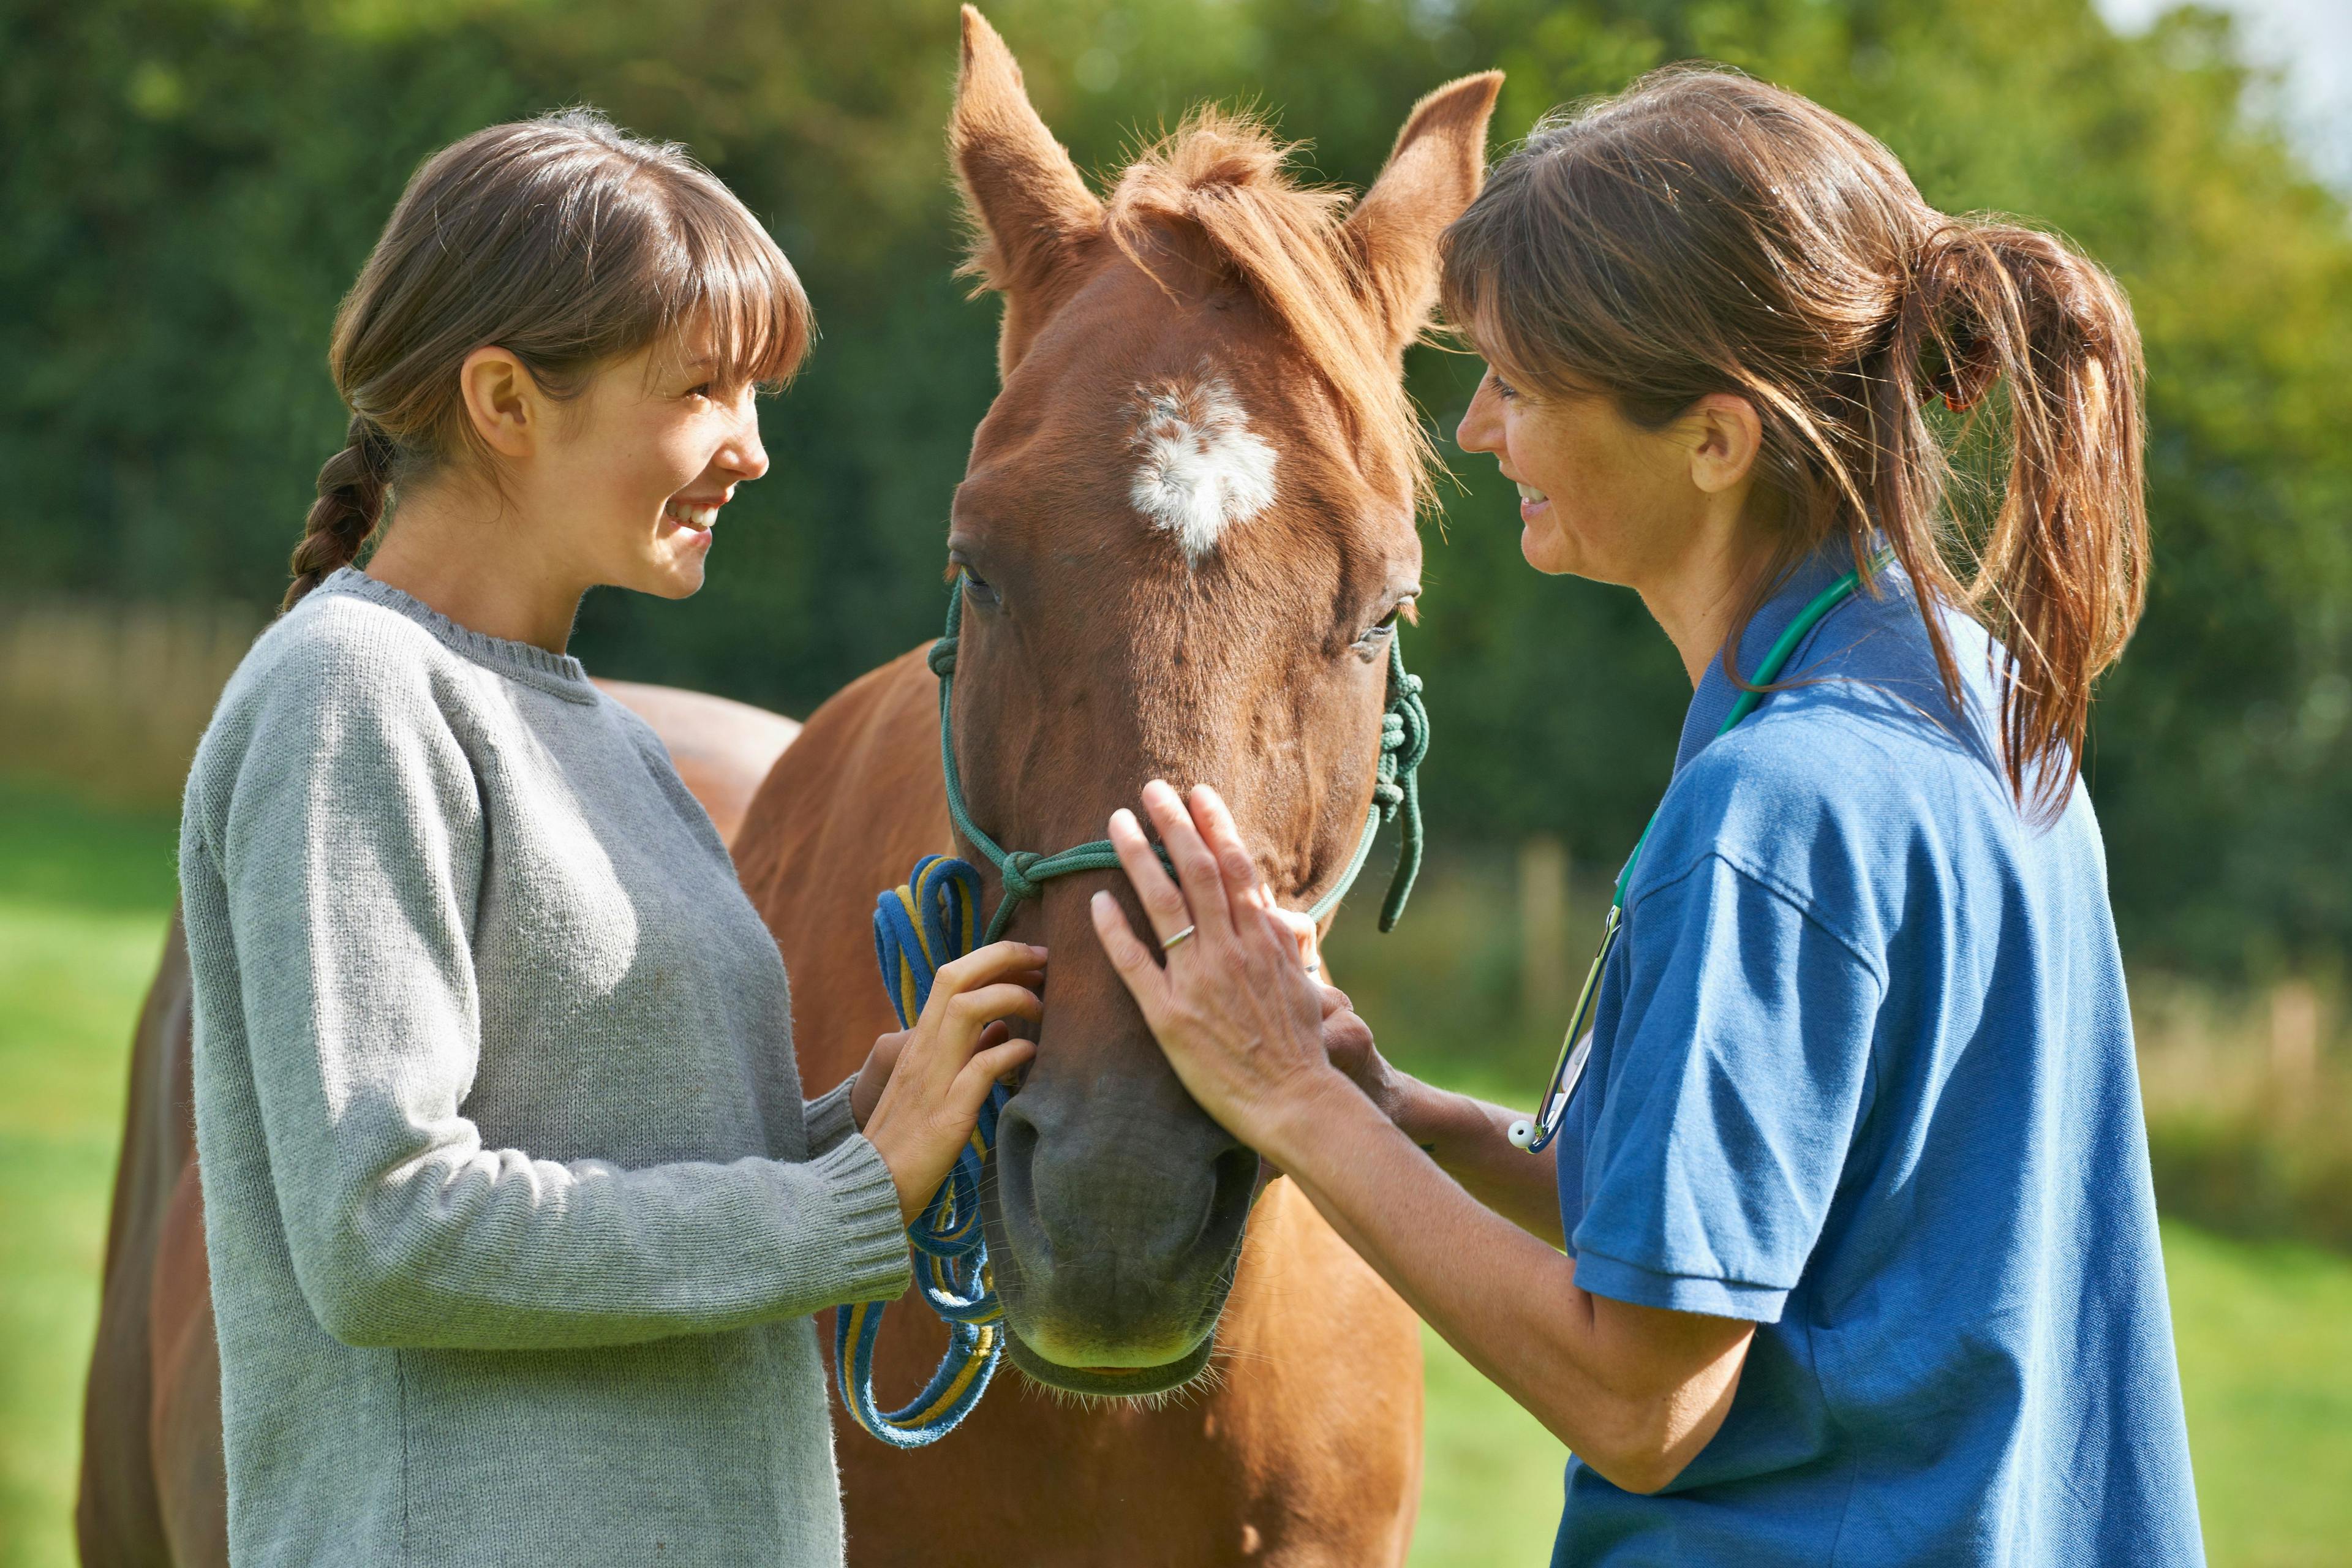 Increasing veterinary technician utilization with new guidelines